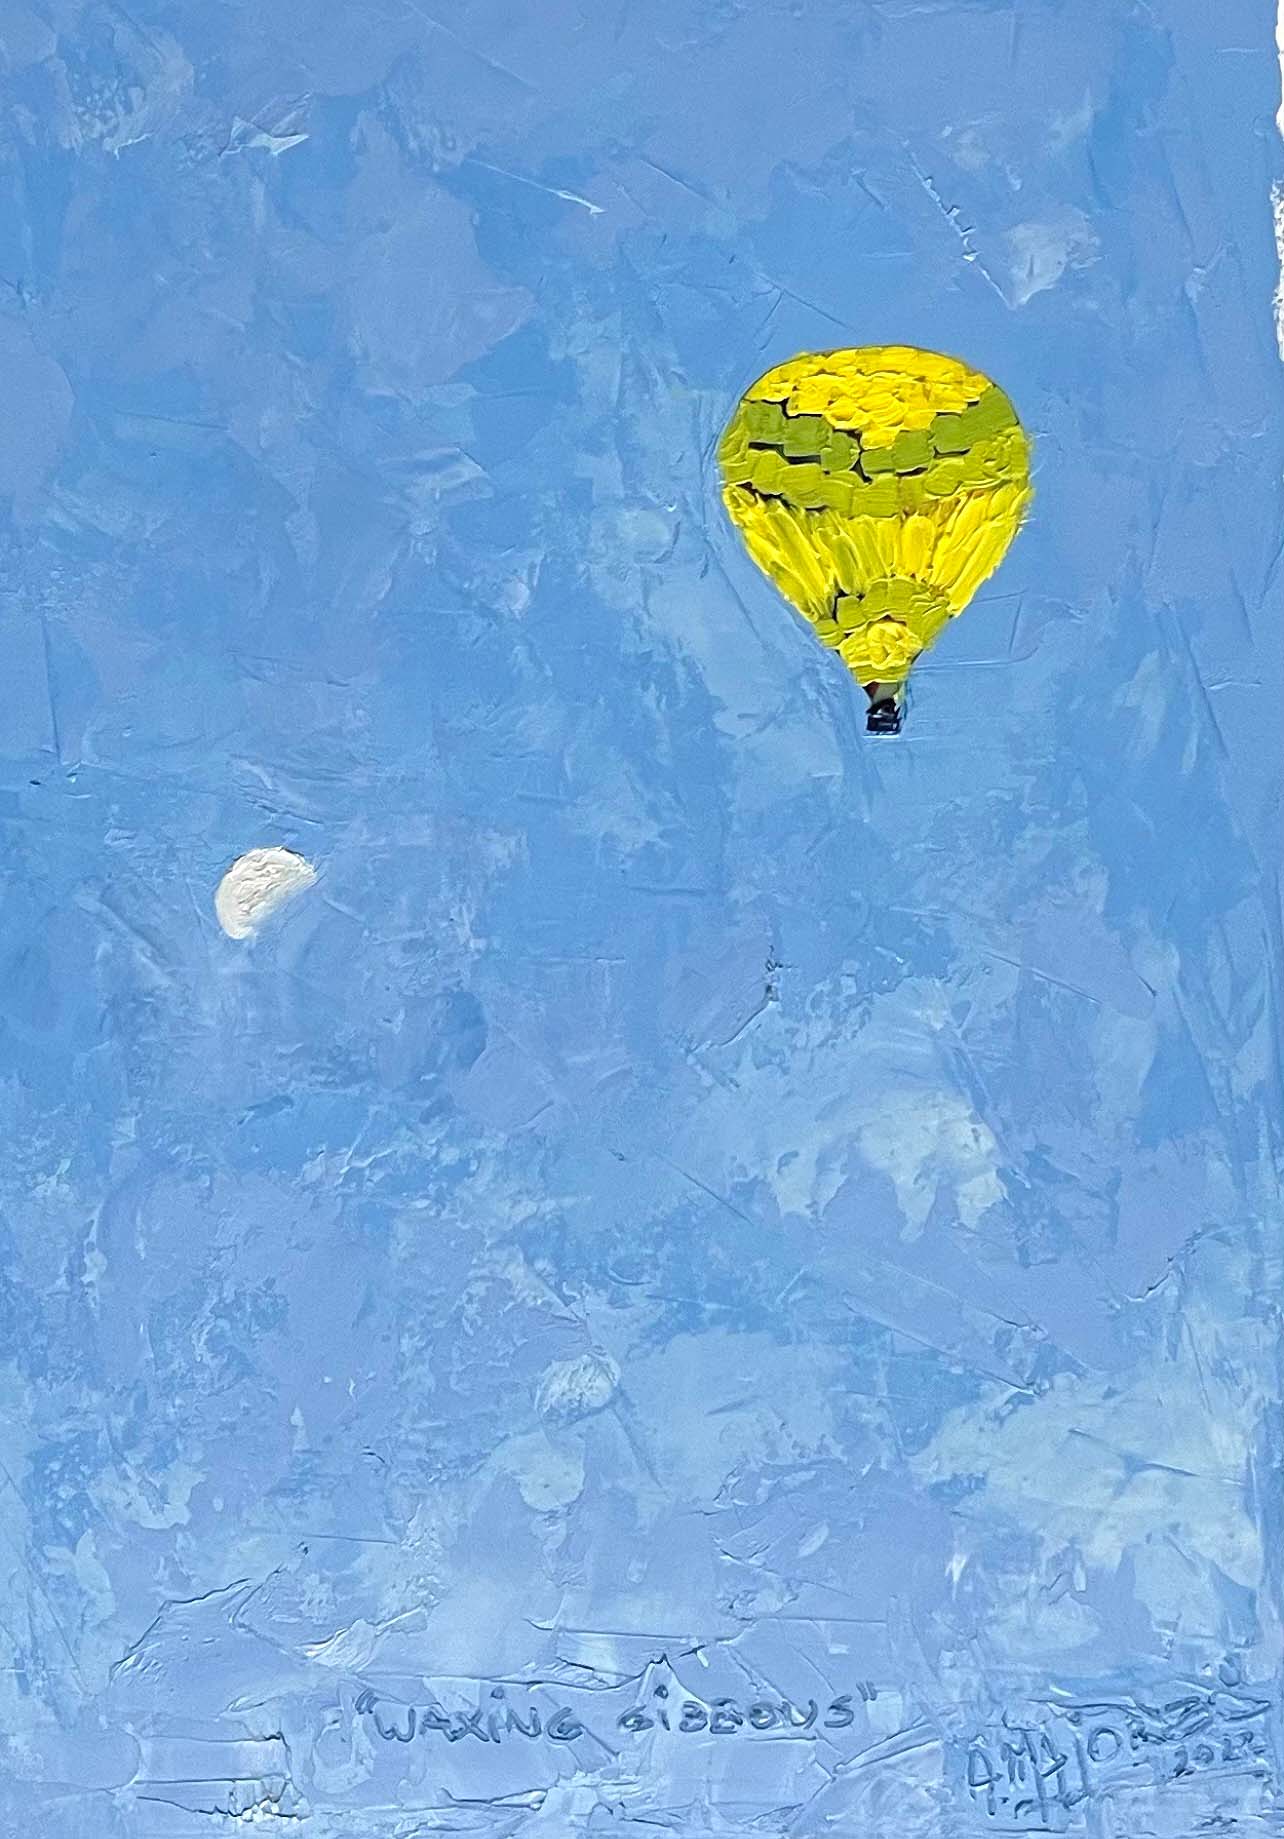 Argentinian artist Aurelia Majorel’s blue and yellow hot air balloon painting “Waxing Gibbous,” 2022, Oil on paper, 16 x 12 inches, on display and available at the Ritz Carlton Miami Beach